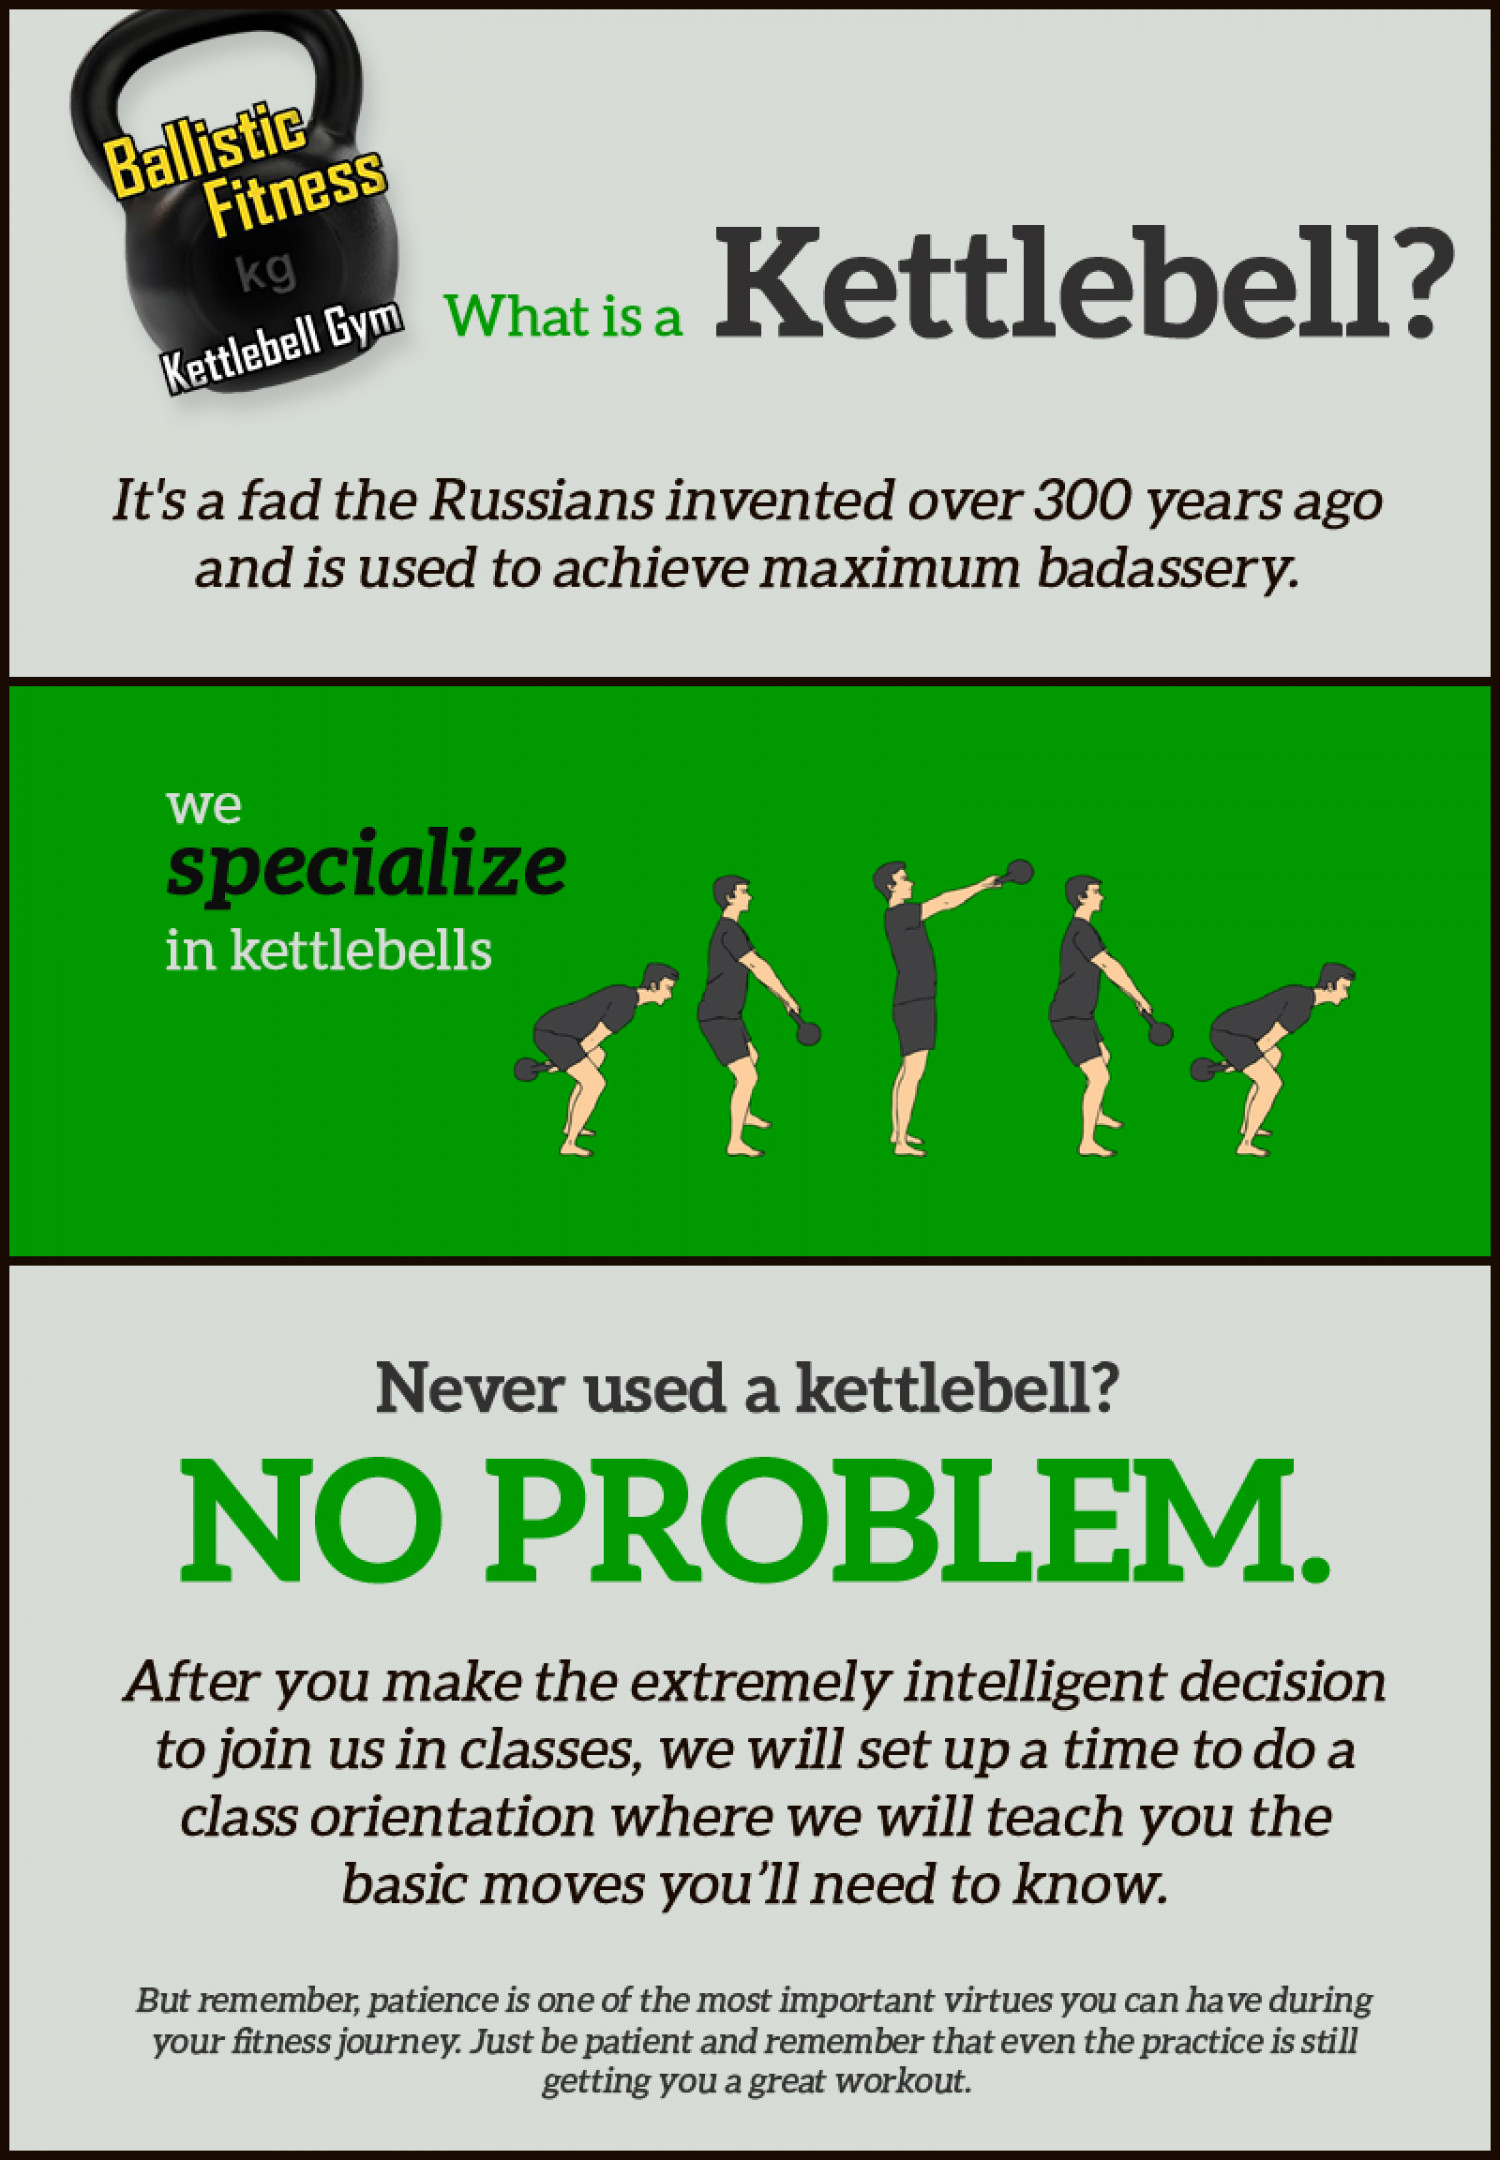 The best Kettlebell Training in the Ballistic Fitness Infographic